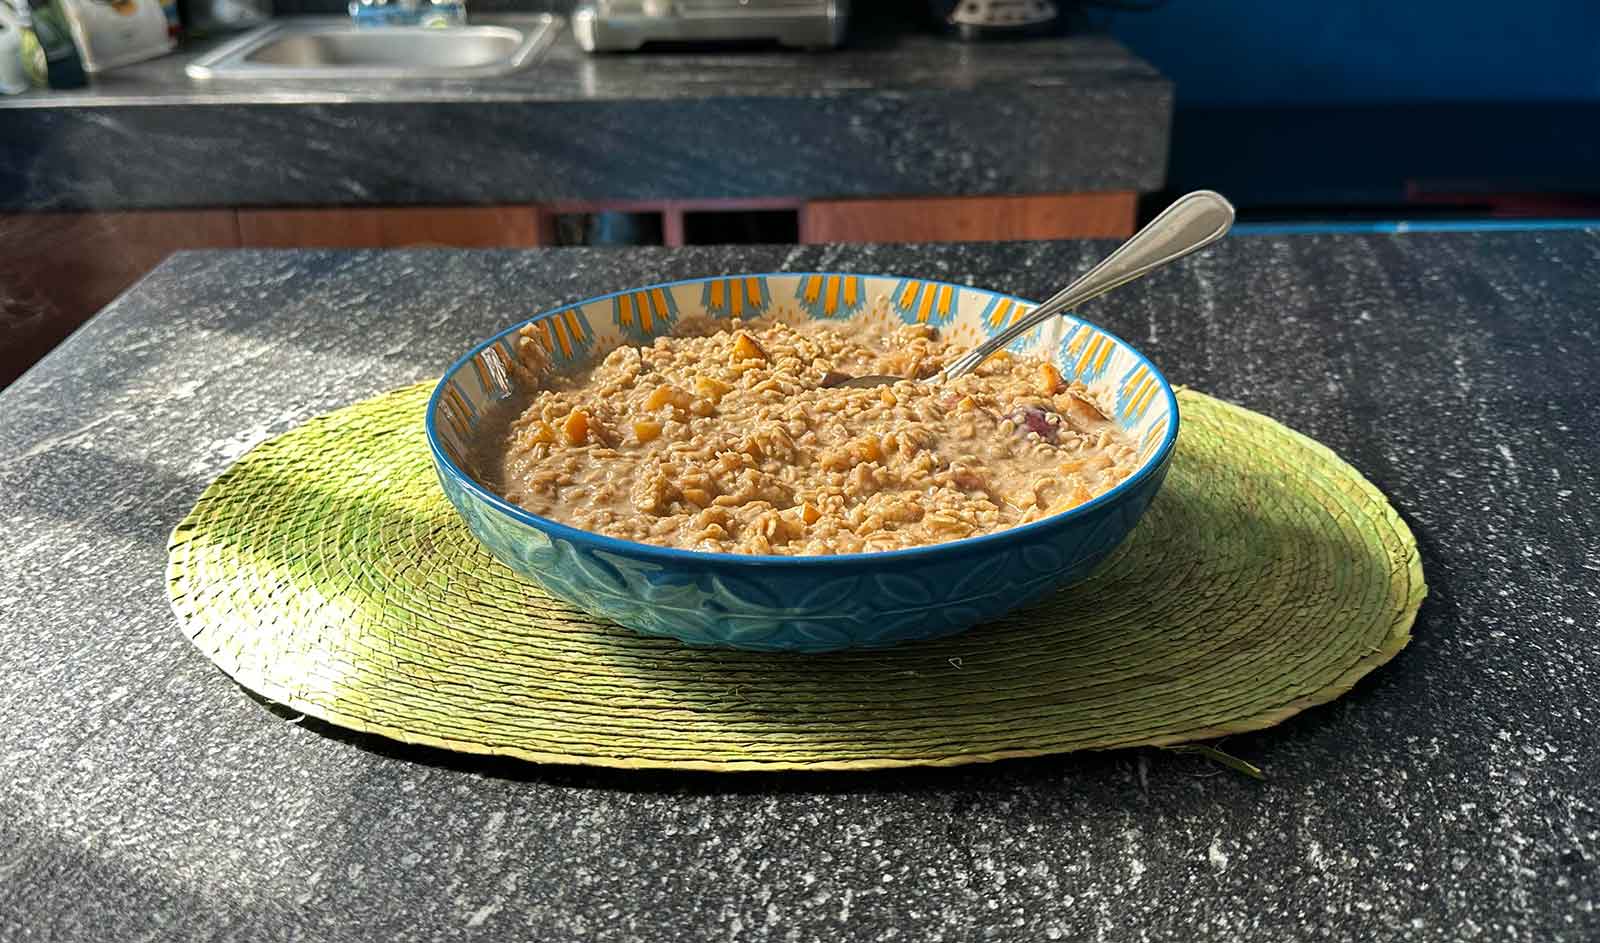 Photograph of a high-protein oatmeal recipe that bodybuilders use to bulk up.